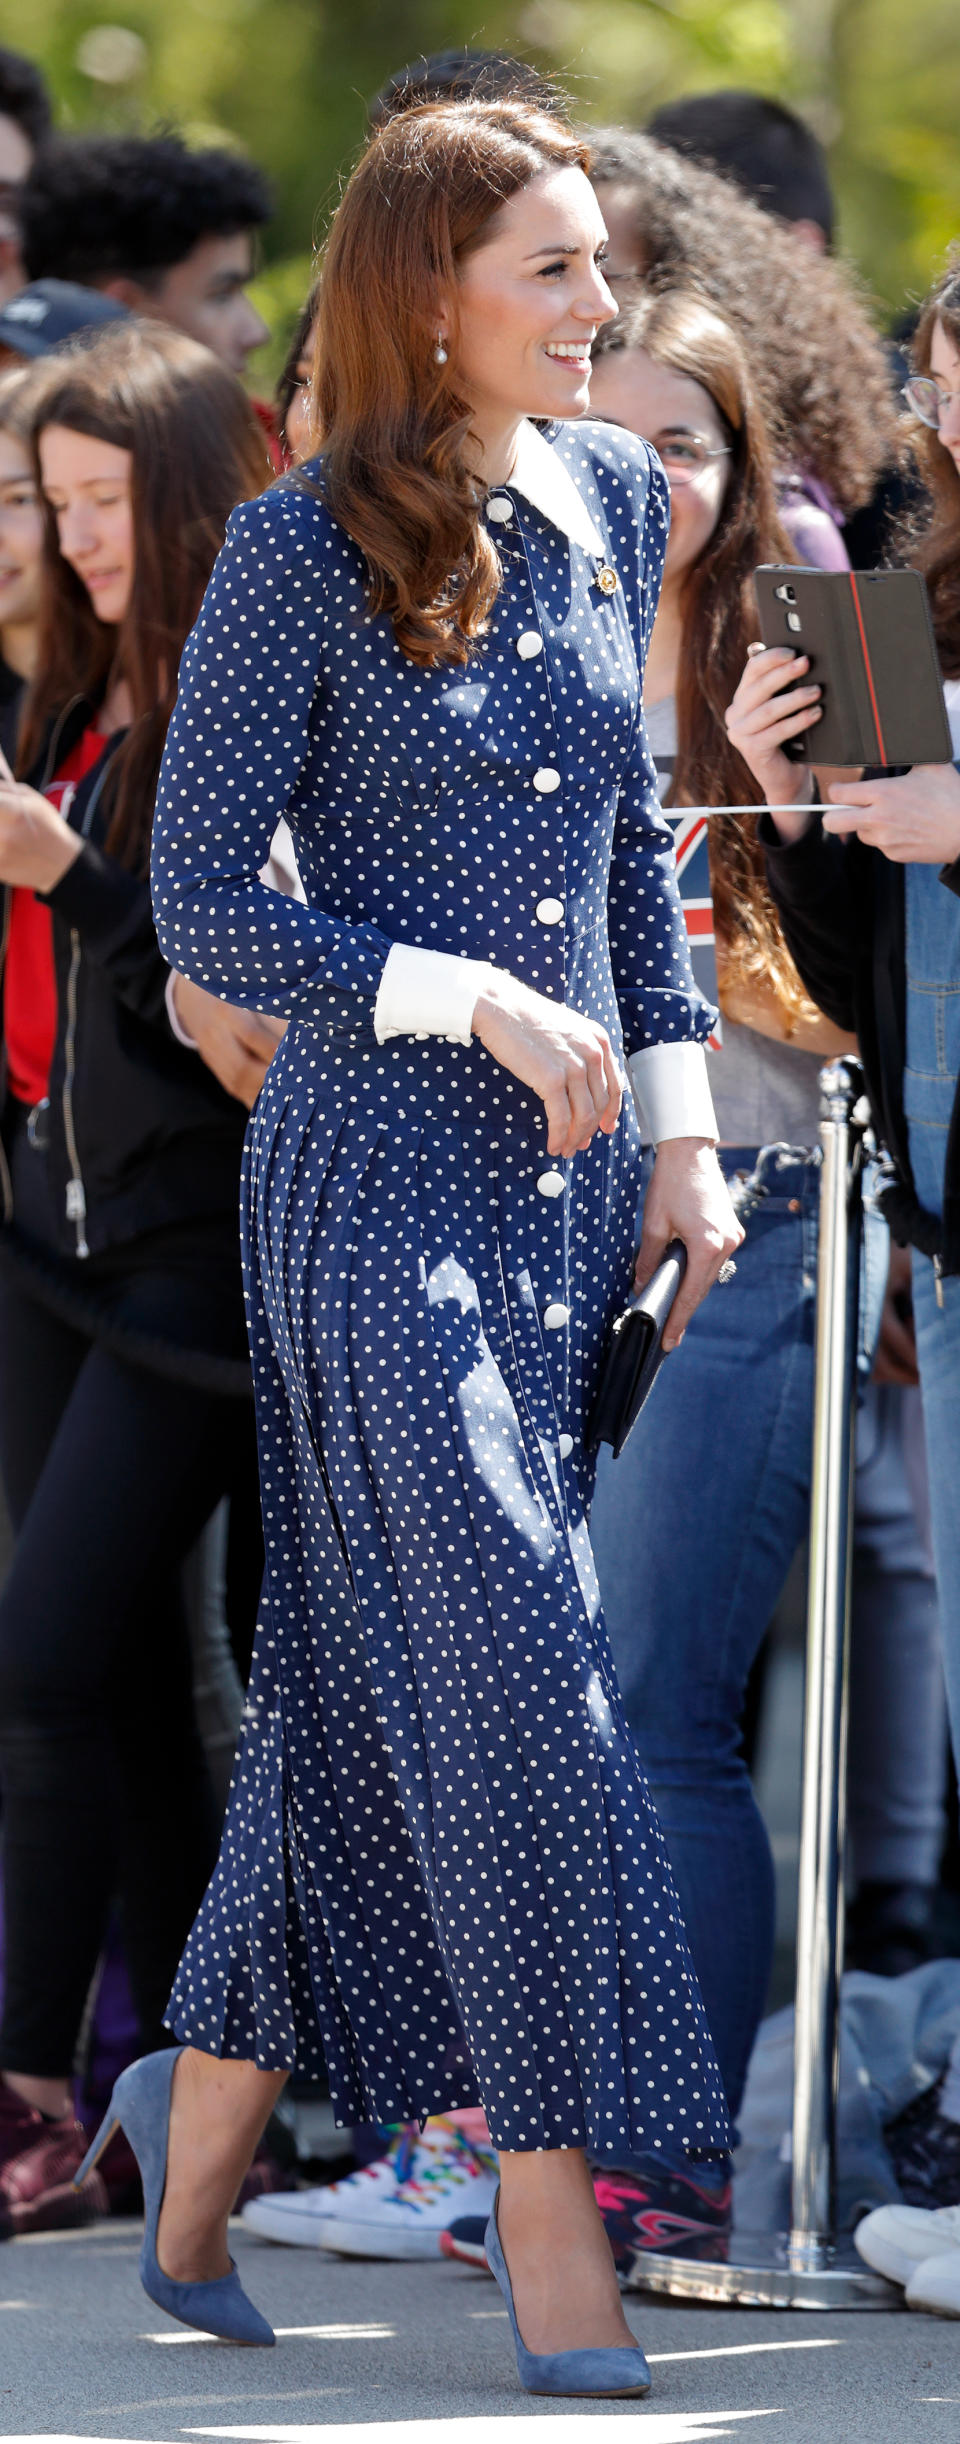 Duchess of Cambridge meets members of the public as she visits the 'D-Day: Interception, Intelligence, Invasion' exhibition at Bletchley Park on May 14, 2019 in Bletchley, England. (Getty Images)